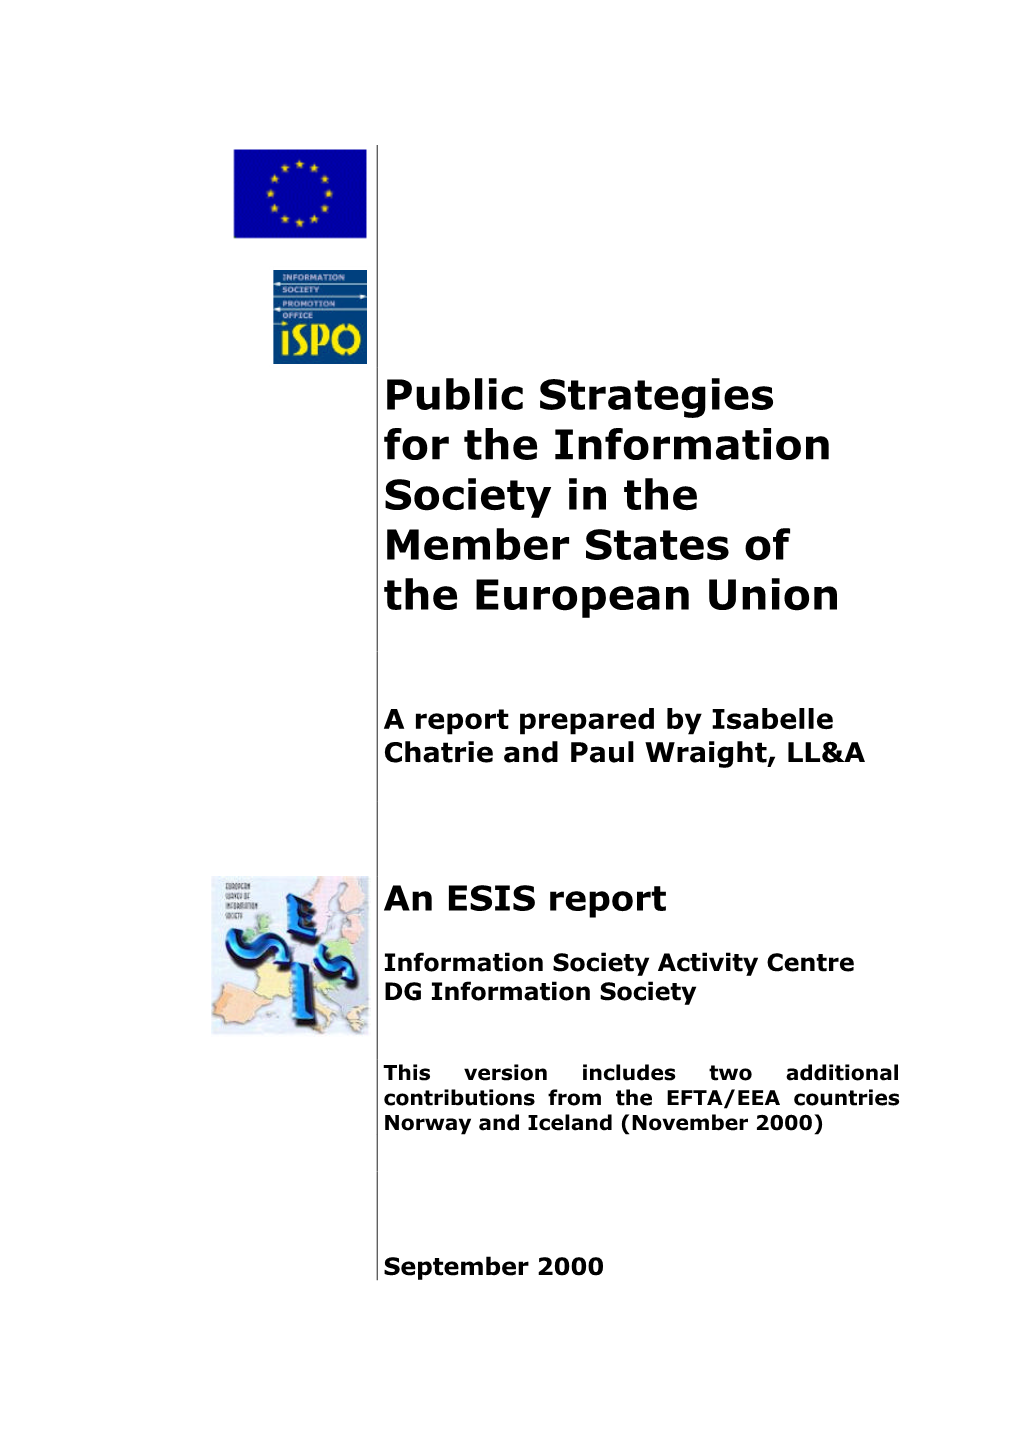 Public Strategies for the Information Society in the Member States of the European Union